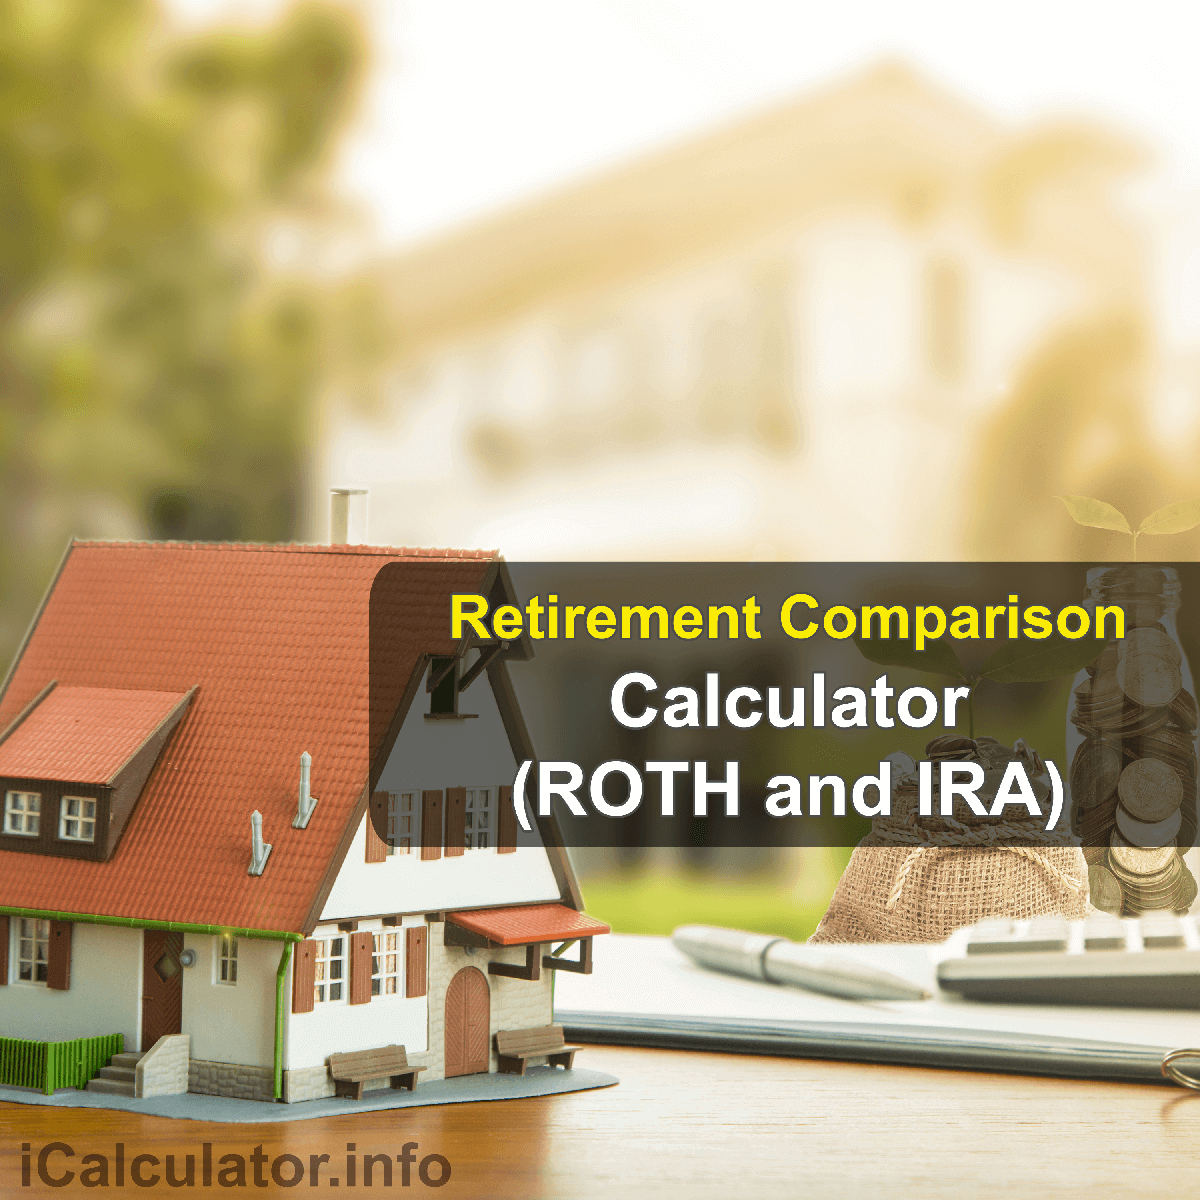 ROTH and IRA Calculator. This image provides details of how to calculate the compound annual growth rate using a good calculator, a pencil and paper. By using the ROTH IRA formula, the IRA Comparison Calculator provides a comparison calculation of the retirement fund provided by ROTH IRA and Traditional IRA retirement saving plans